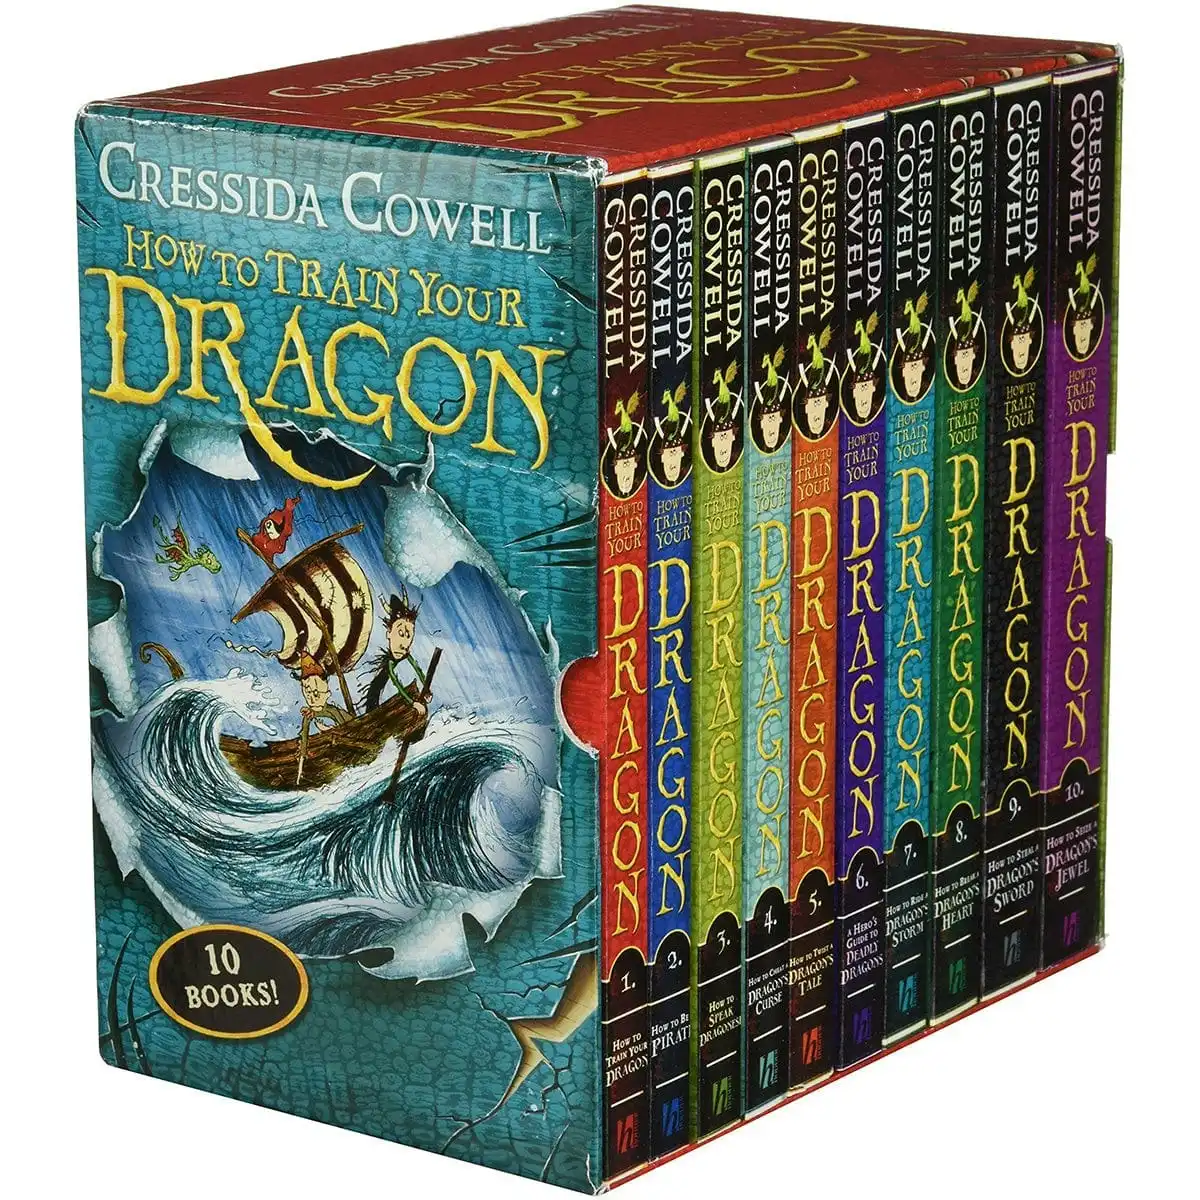 How To Train Your Dragon - 12 Copy Box Set